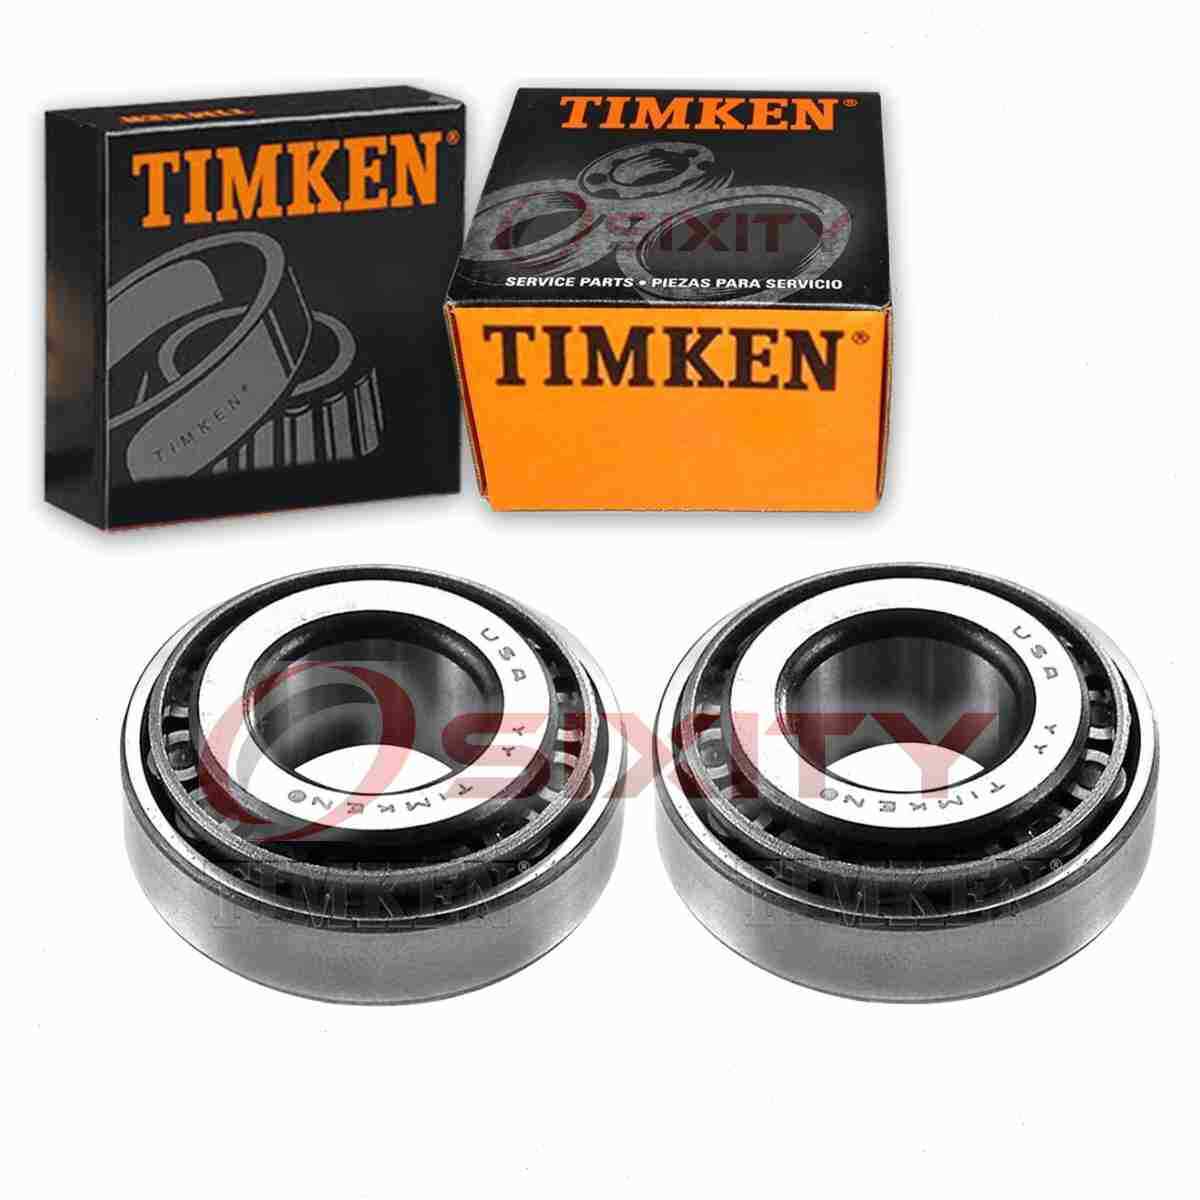 2 pc Timken Rear Outer Wheel Bearing and Race Sets for 1986-1989 Mazda 323 gb